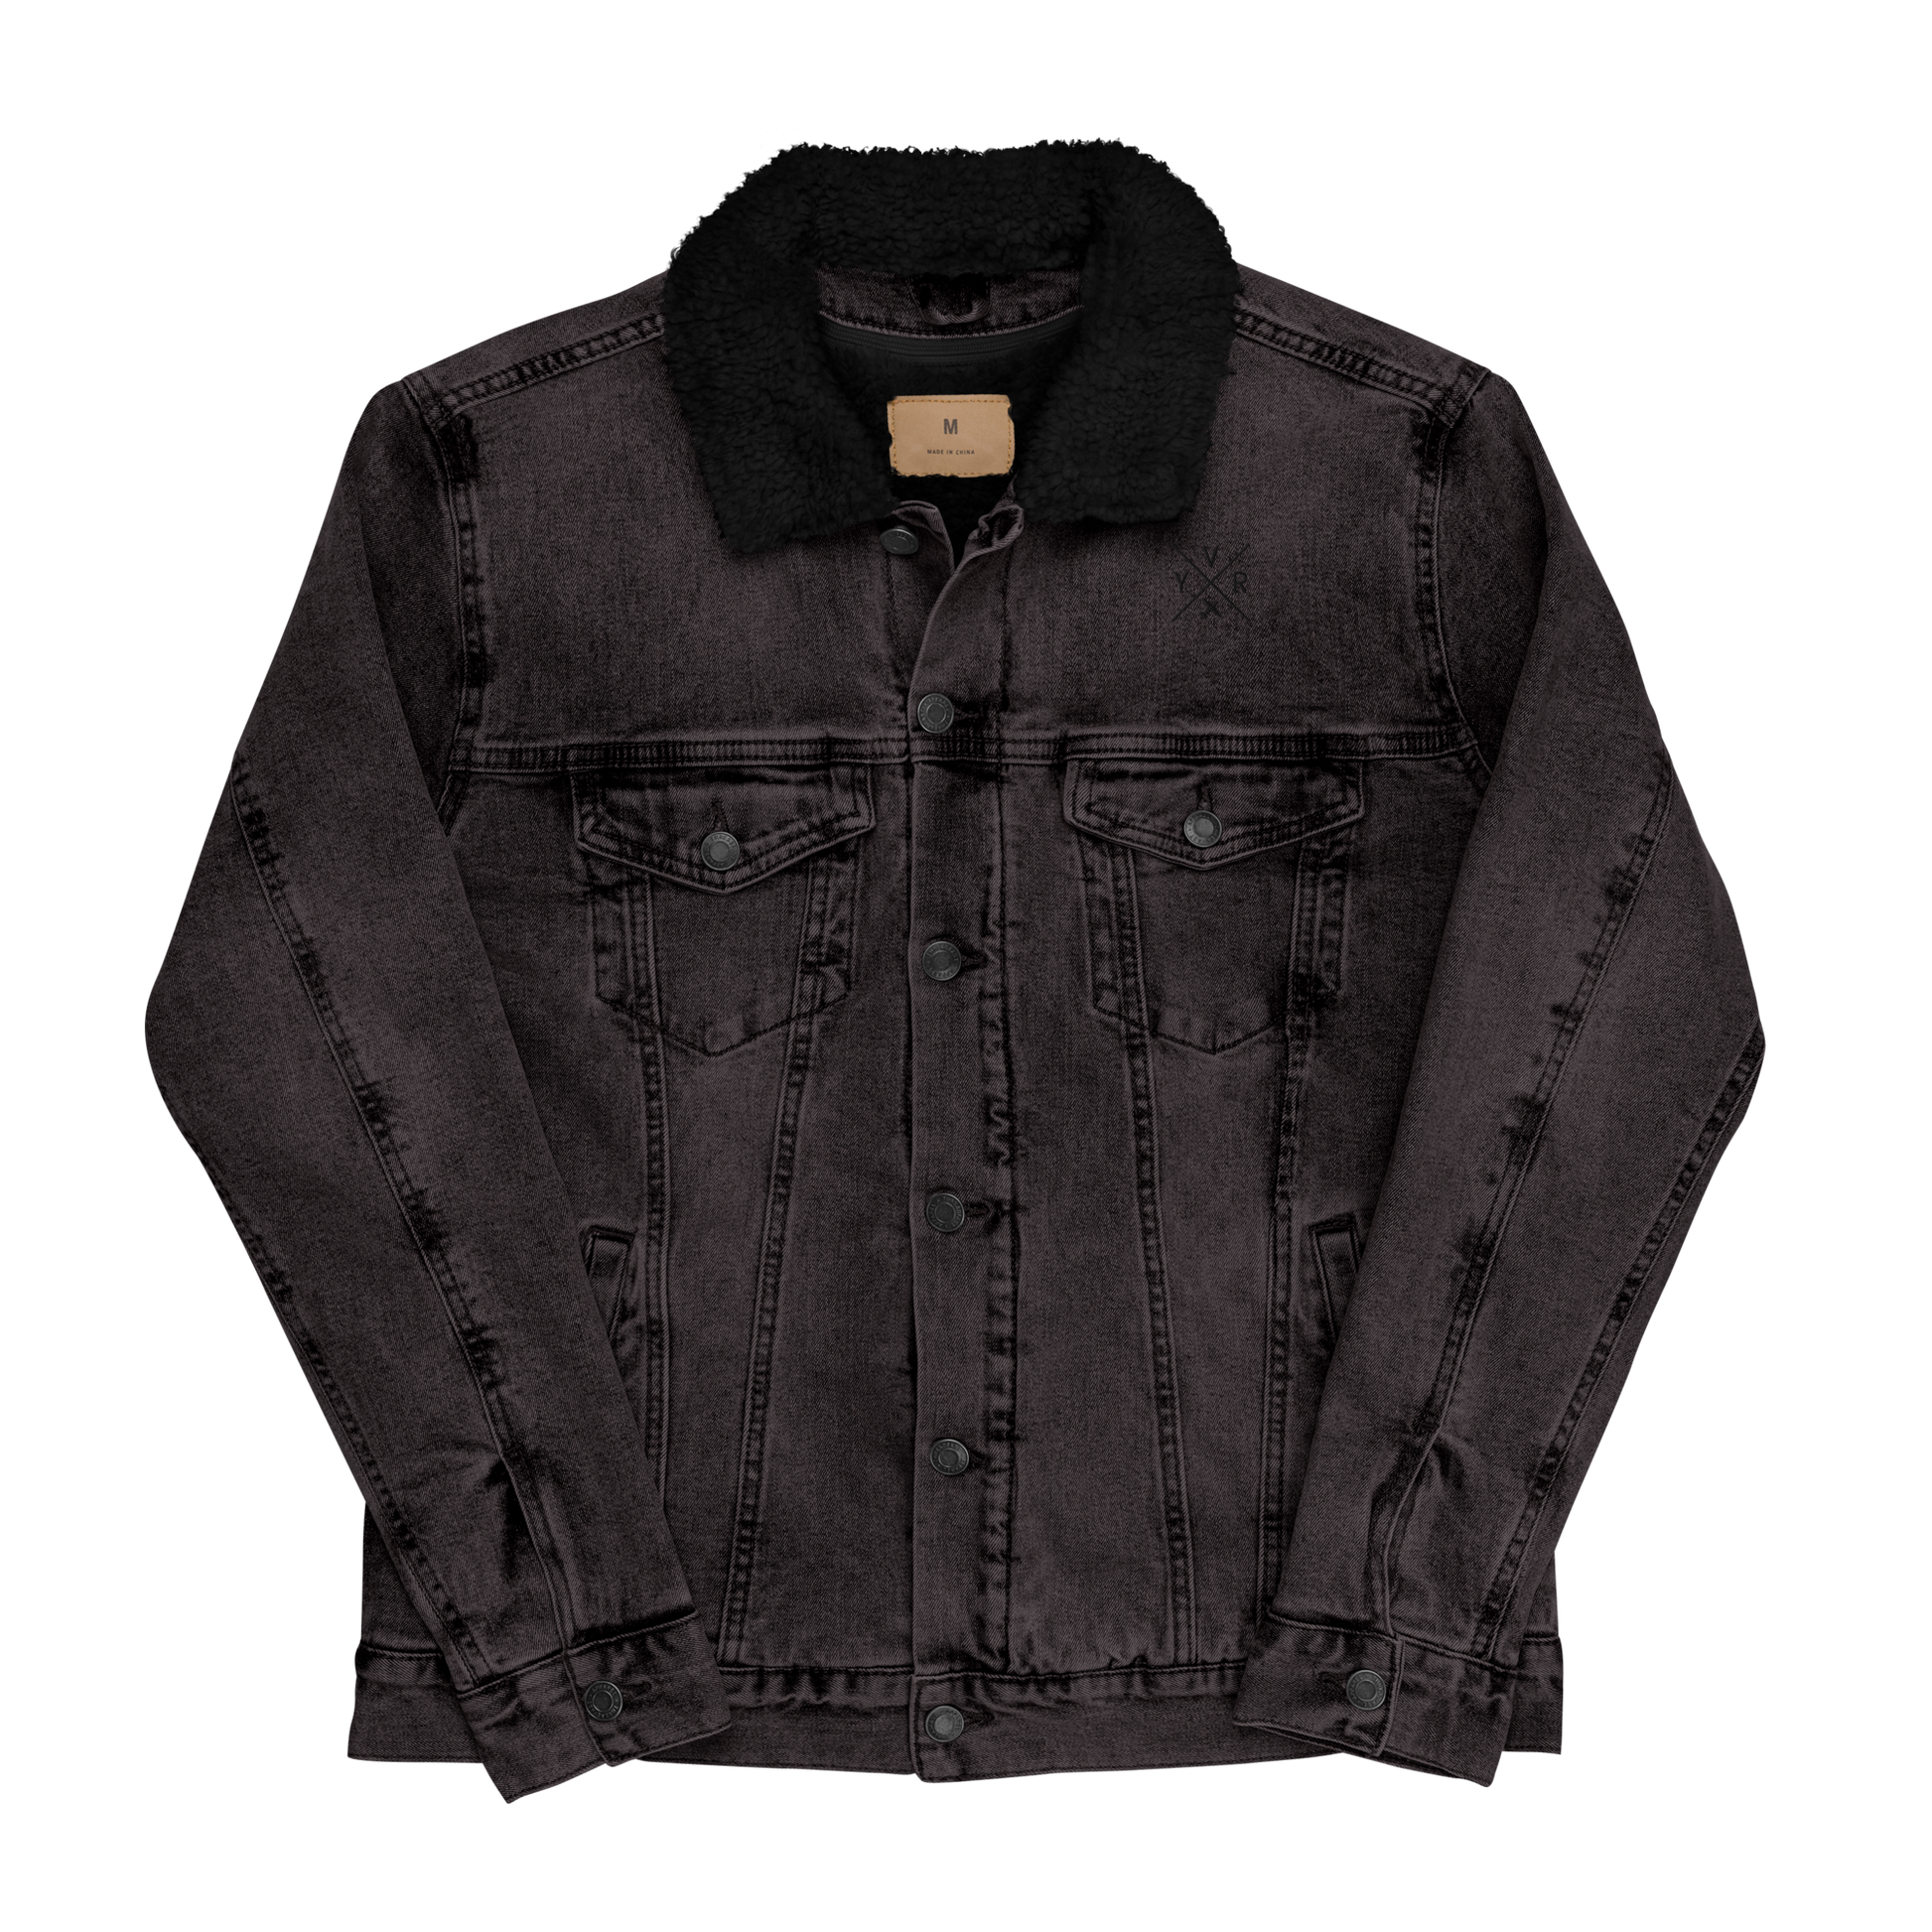 YHM Designs - YVR Vancouver Denim Sherpa Jacket - Crossed-X Design with Airport Code and Vintage Propliner - Black & White Embroidery - Image 02